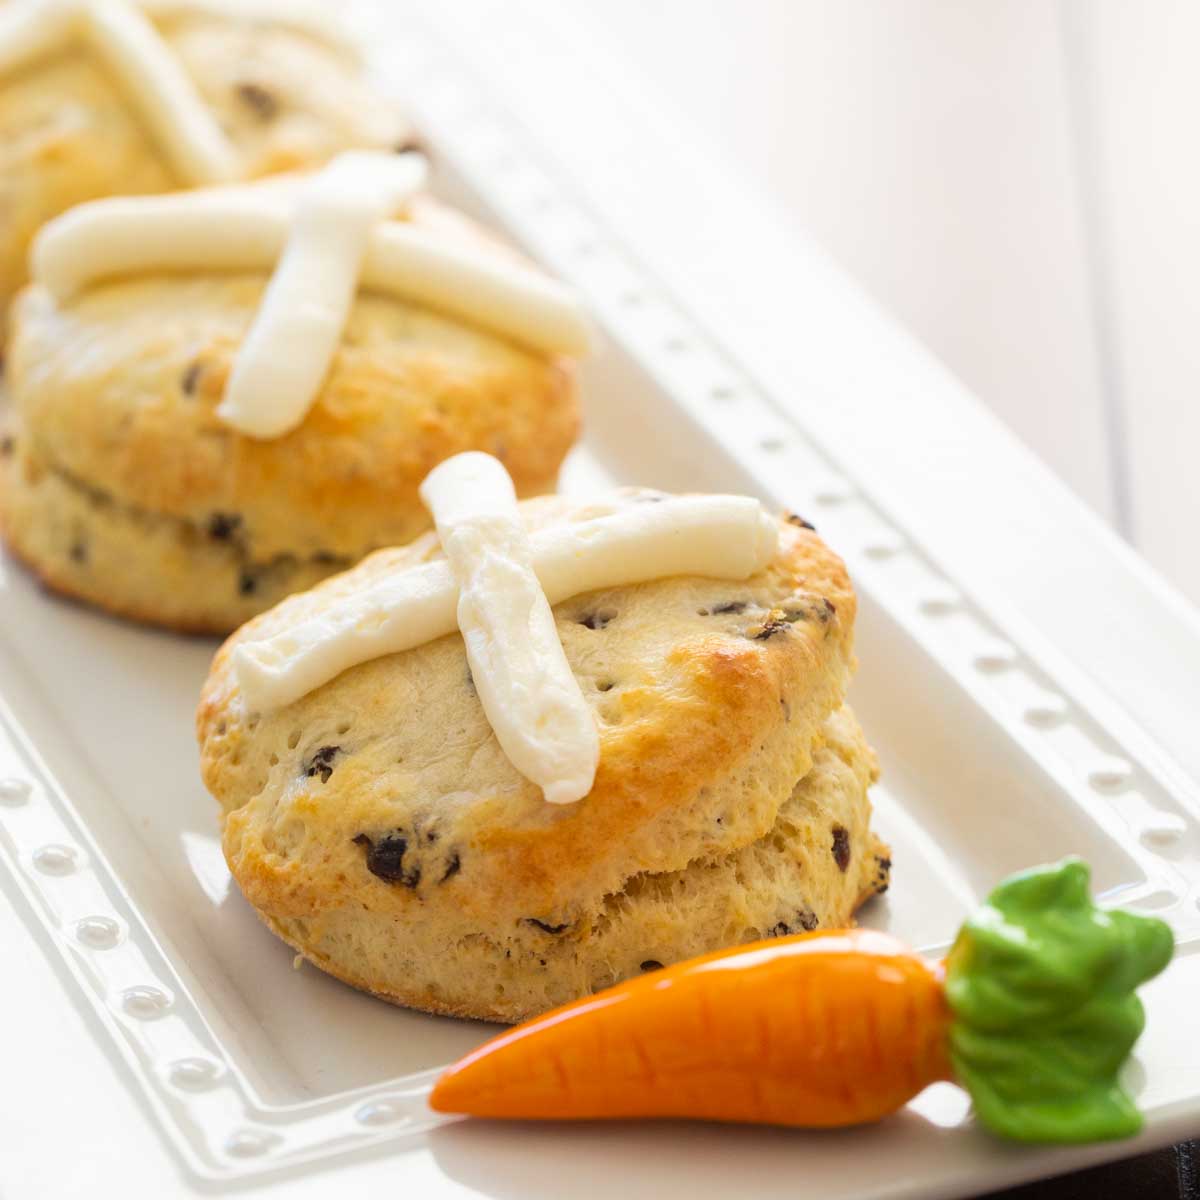 A platter of hot cross biscuits has a ceramic carrot accessory. Each biscuit has a cream cheese frosting cross on the top and currants inside.